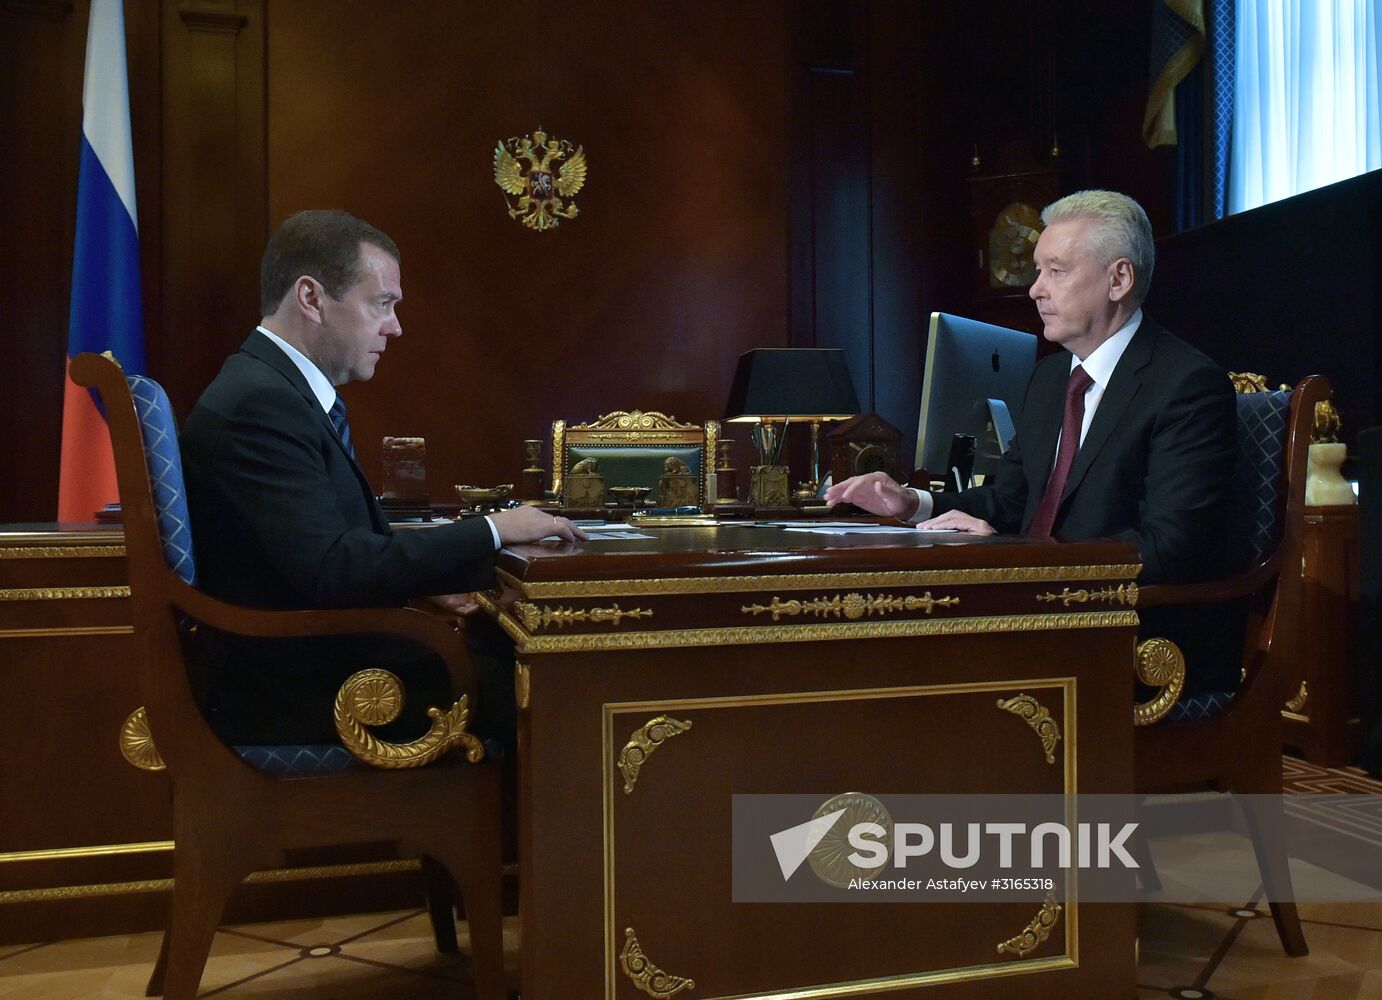 Prime Minister Dmitry Medvedev meets with Moscow Mayor Sergei Sobyanin